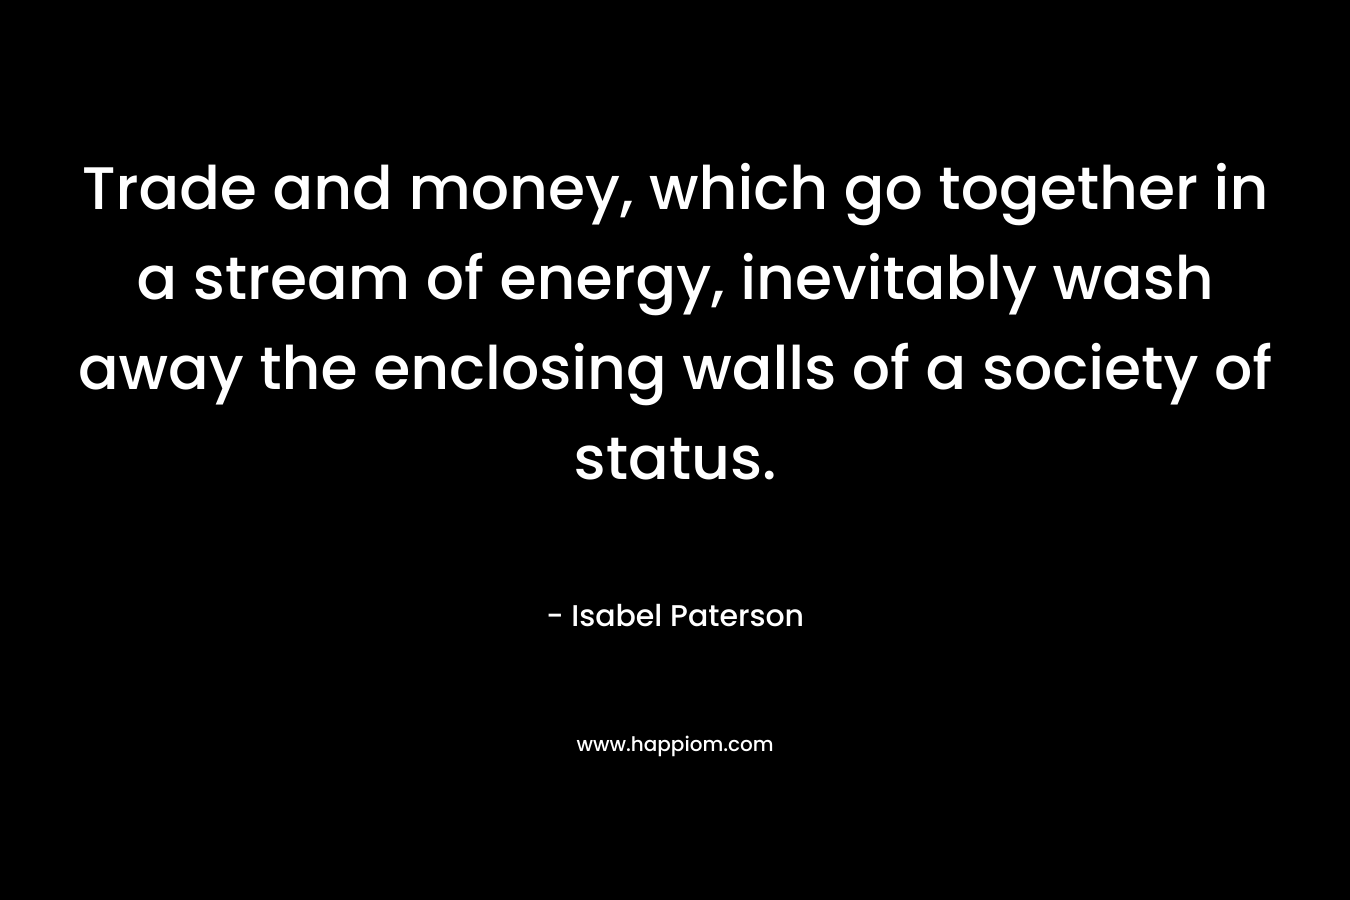 Trade and money, which go together in a stream of energy, inevitably wash away the enclosing walls of a society of status. – Isabel Paterson